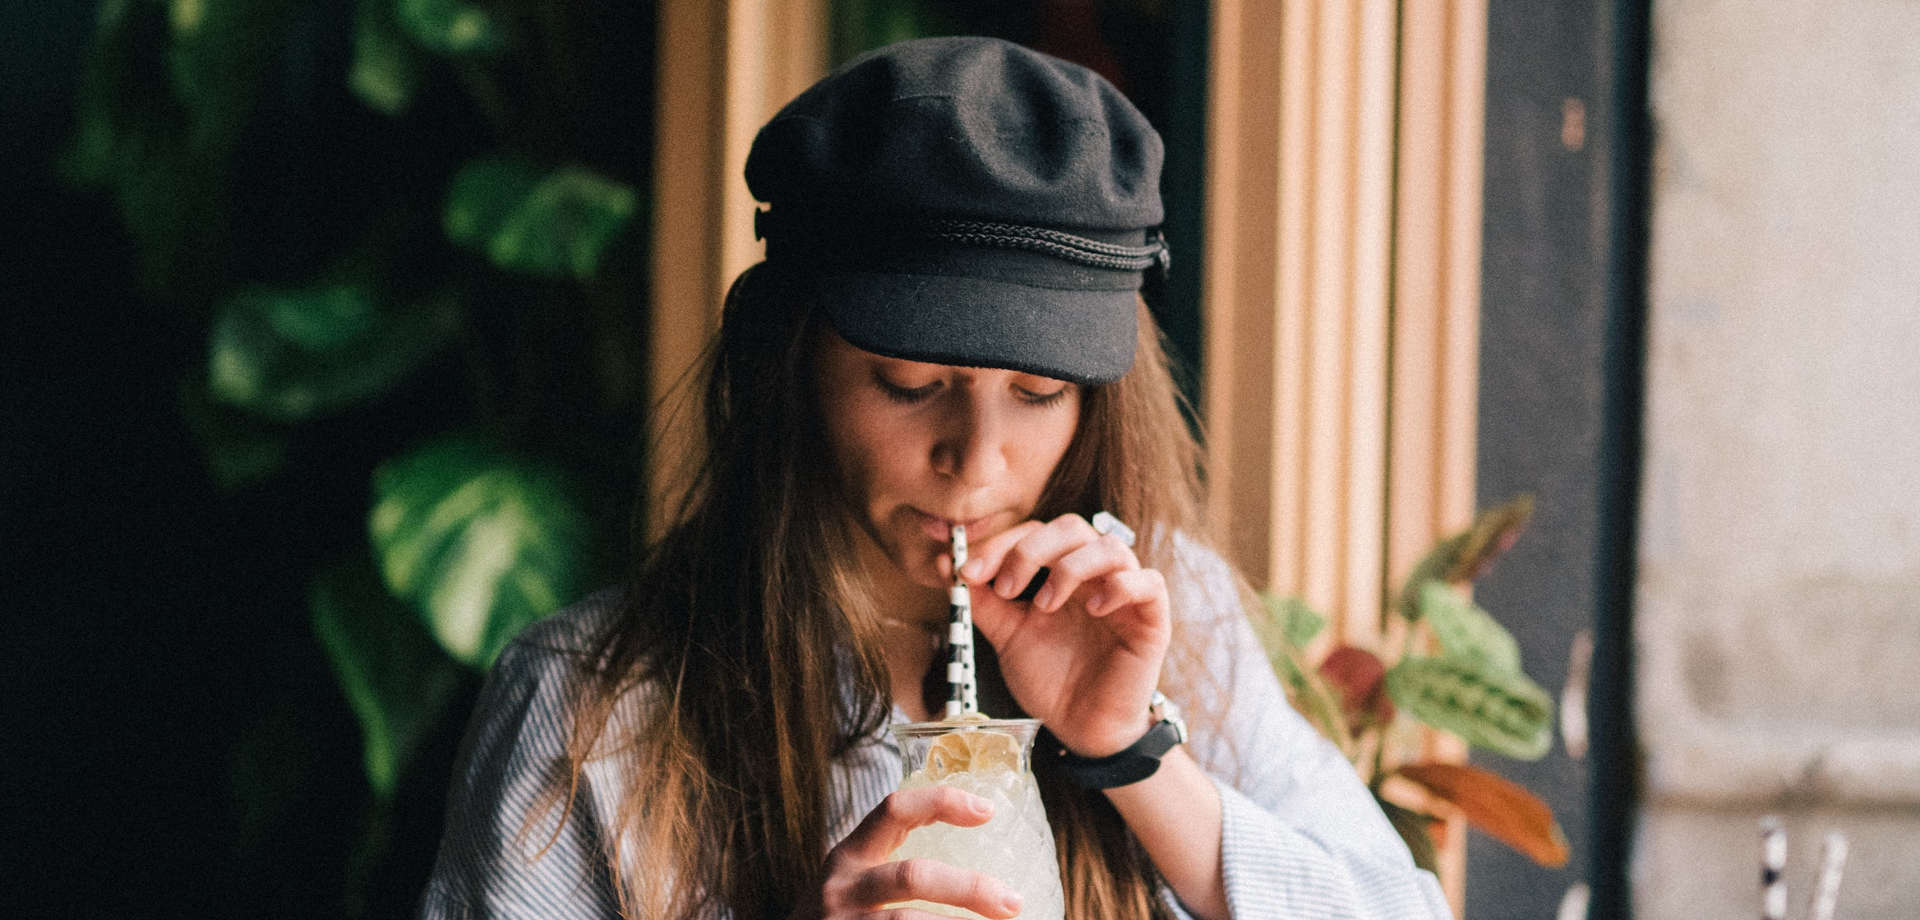 A woman wearing a soft cap drinking a cocktail through a straw